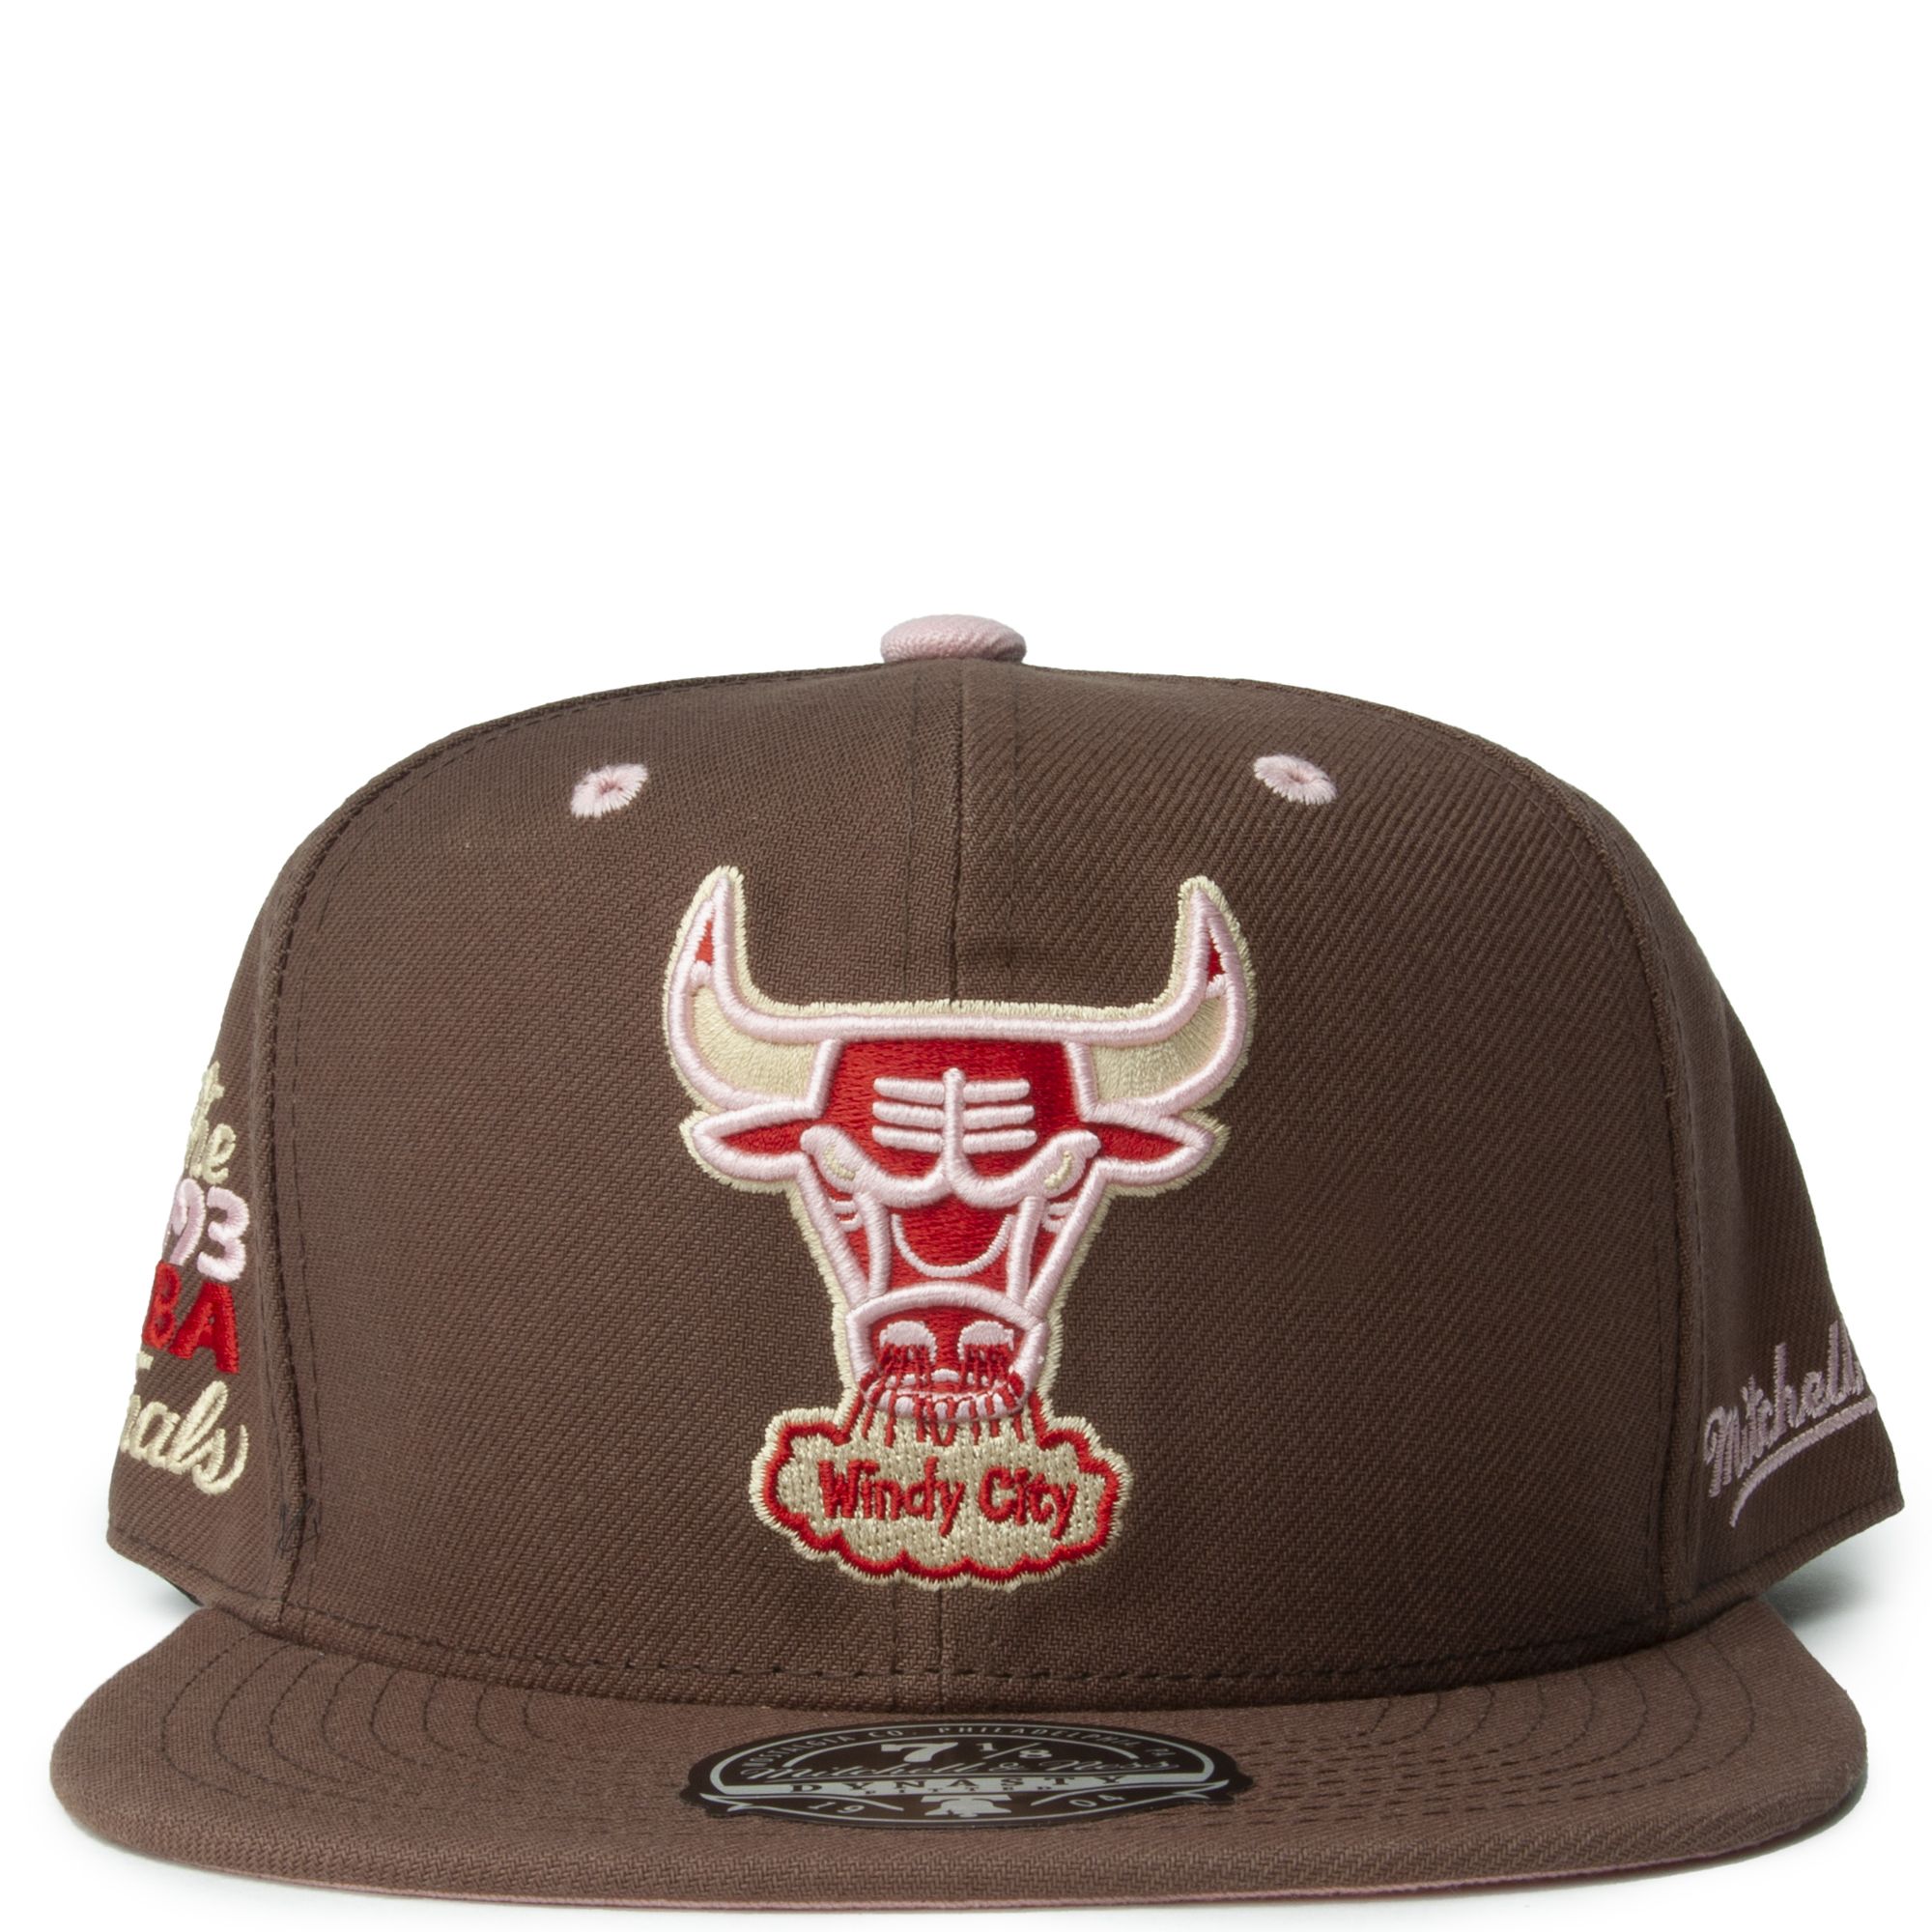 Mitchell and Ness Chicago Bulls NBA Brown Sugar Bacon Fitted Hat Brown